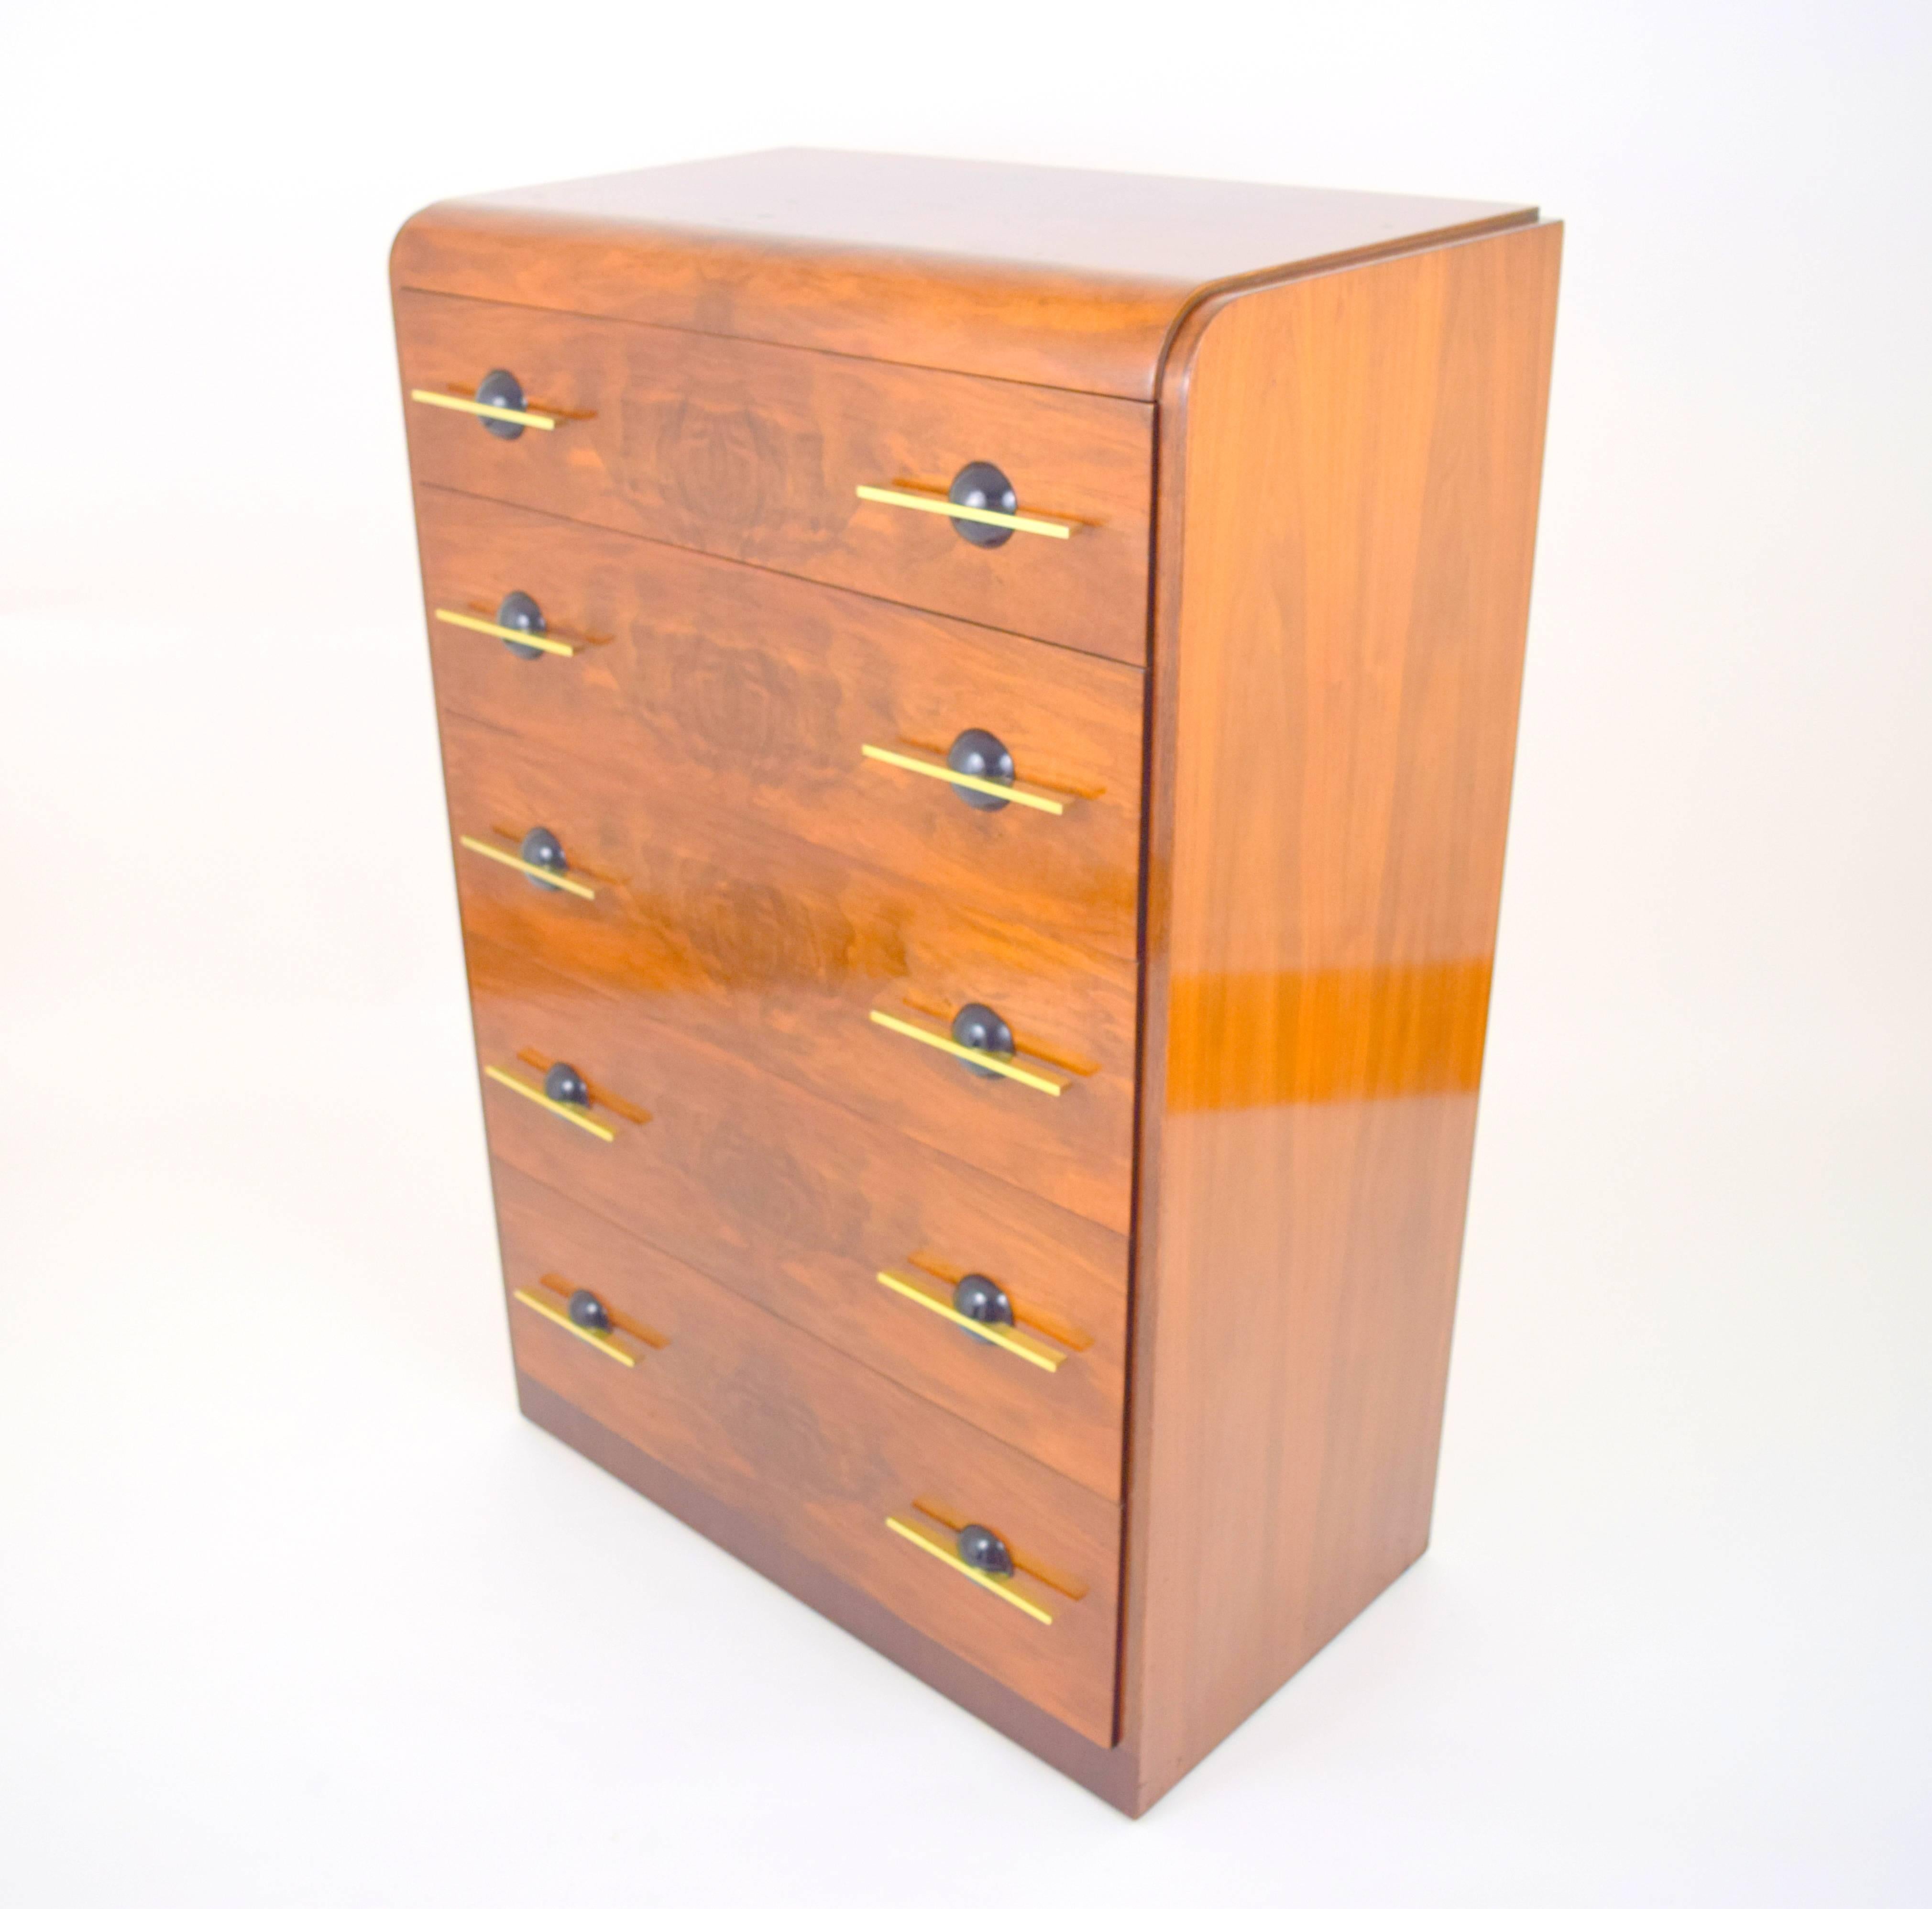 Stunning streamlined moderne chest of drawers by Donald Deskey. Walnut case with five waterfall burl wood front drawers with solid brass bar pulls through hemispherical ebonized wood back plates. Elegant and functional early American modernism in